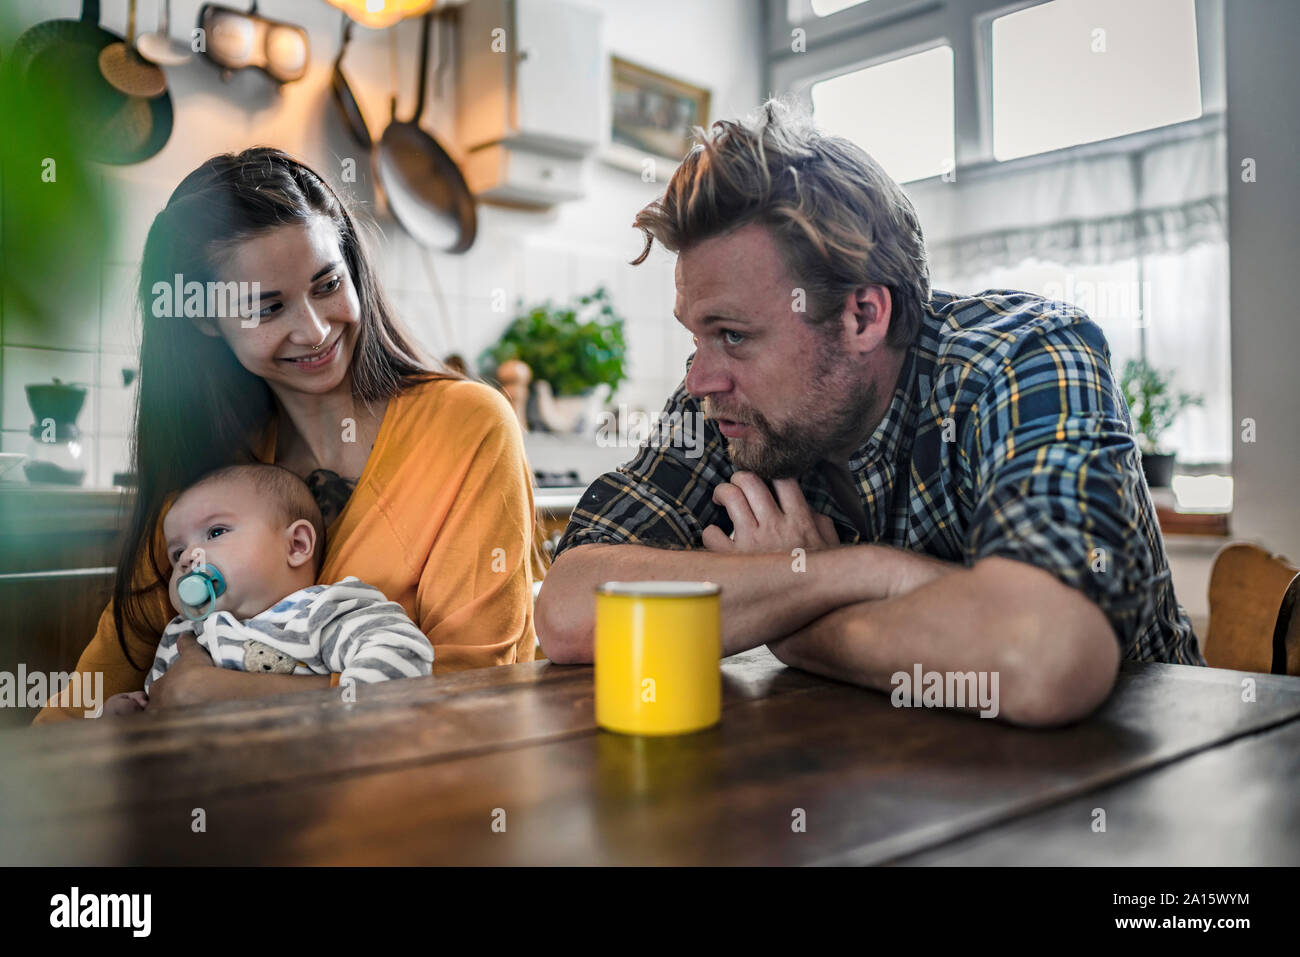 Family with baby sitting at kitchen table at home Stock Photo